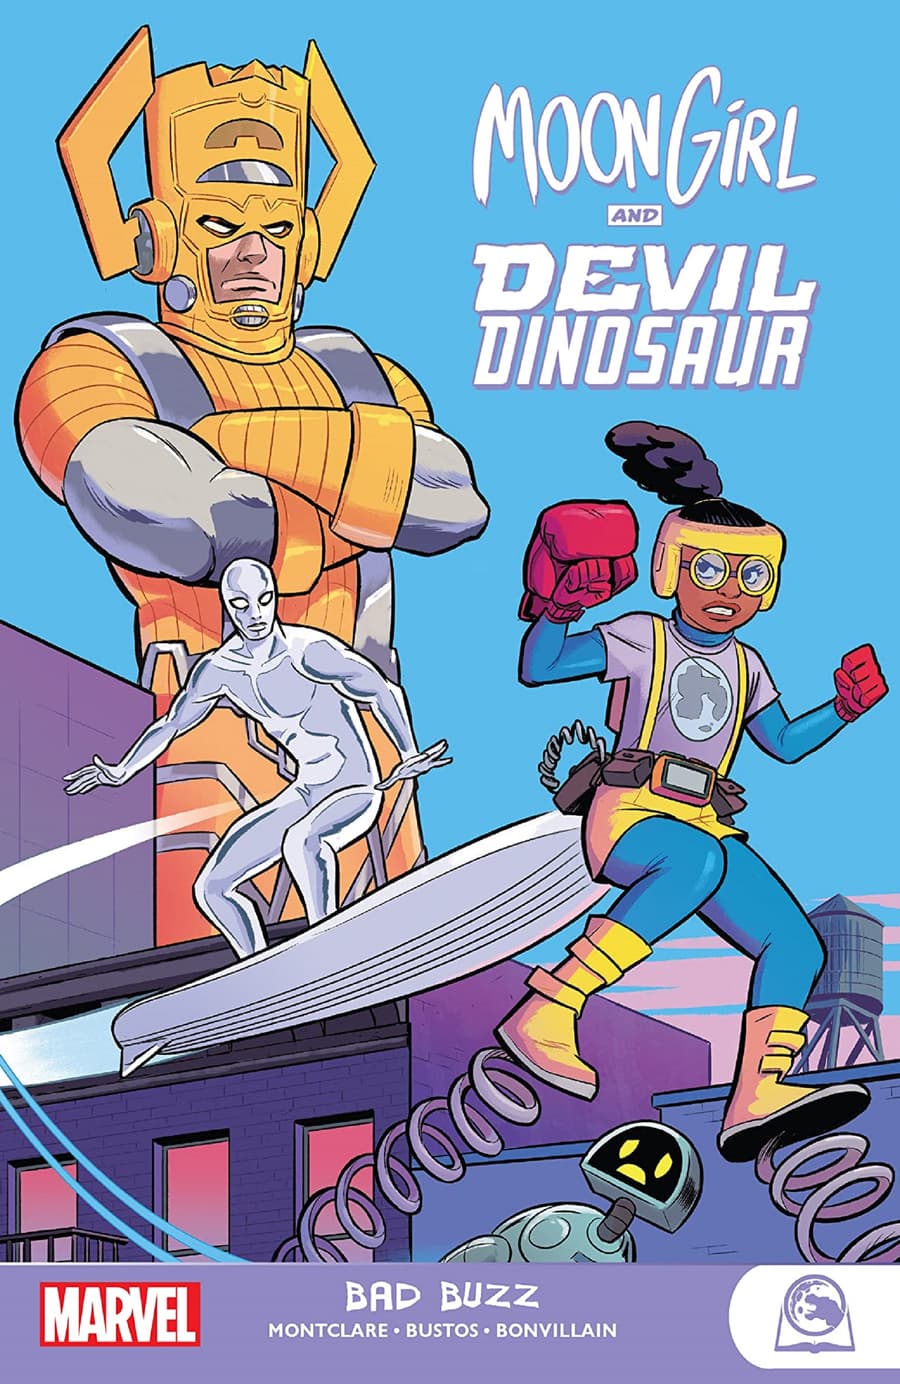 Cover to MOON GIRL AND DEVIL DINOSAUR: BAD BUZZ.